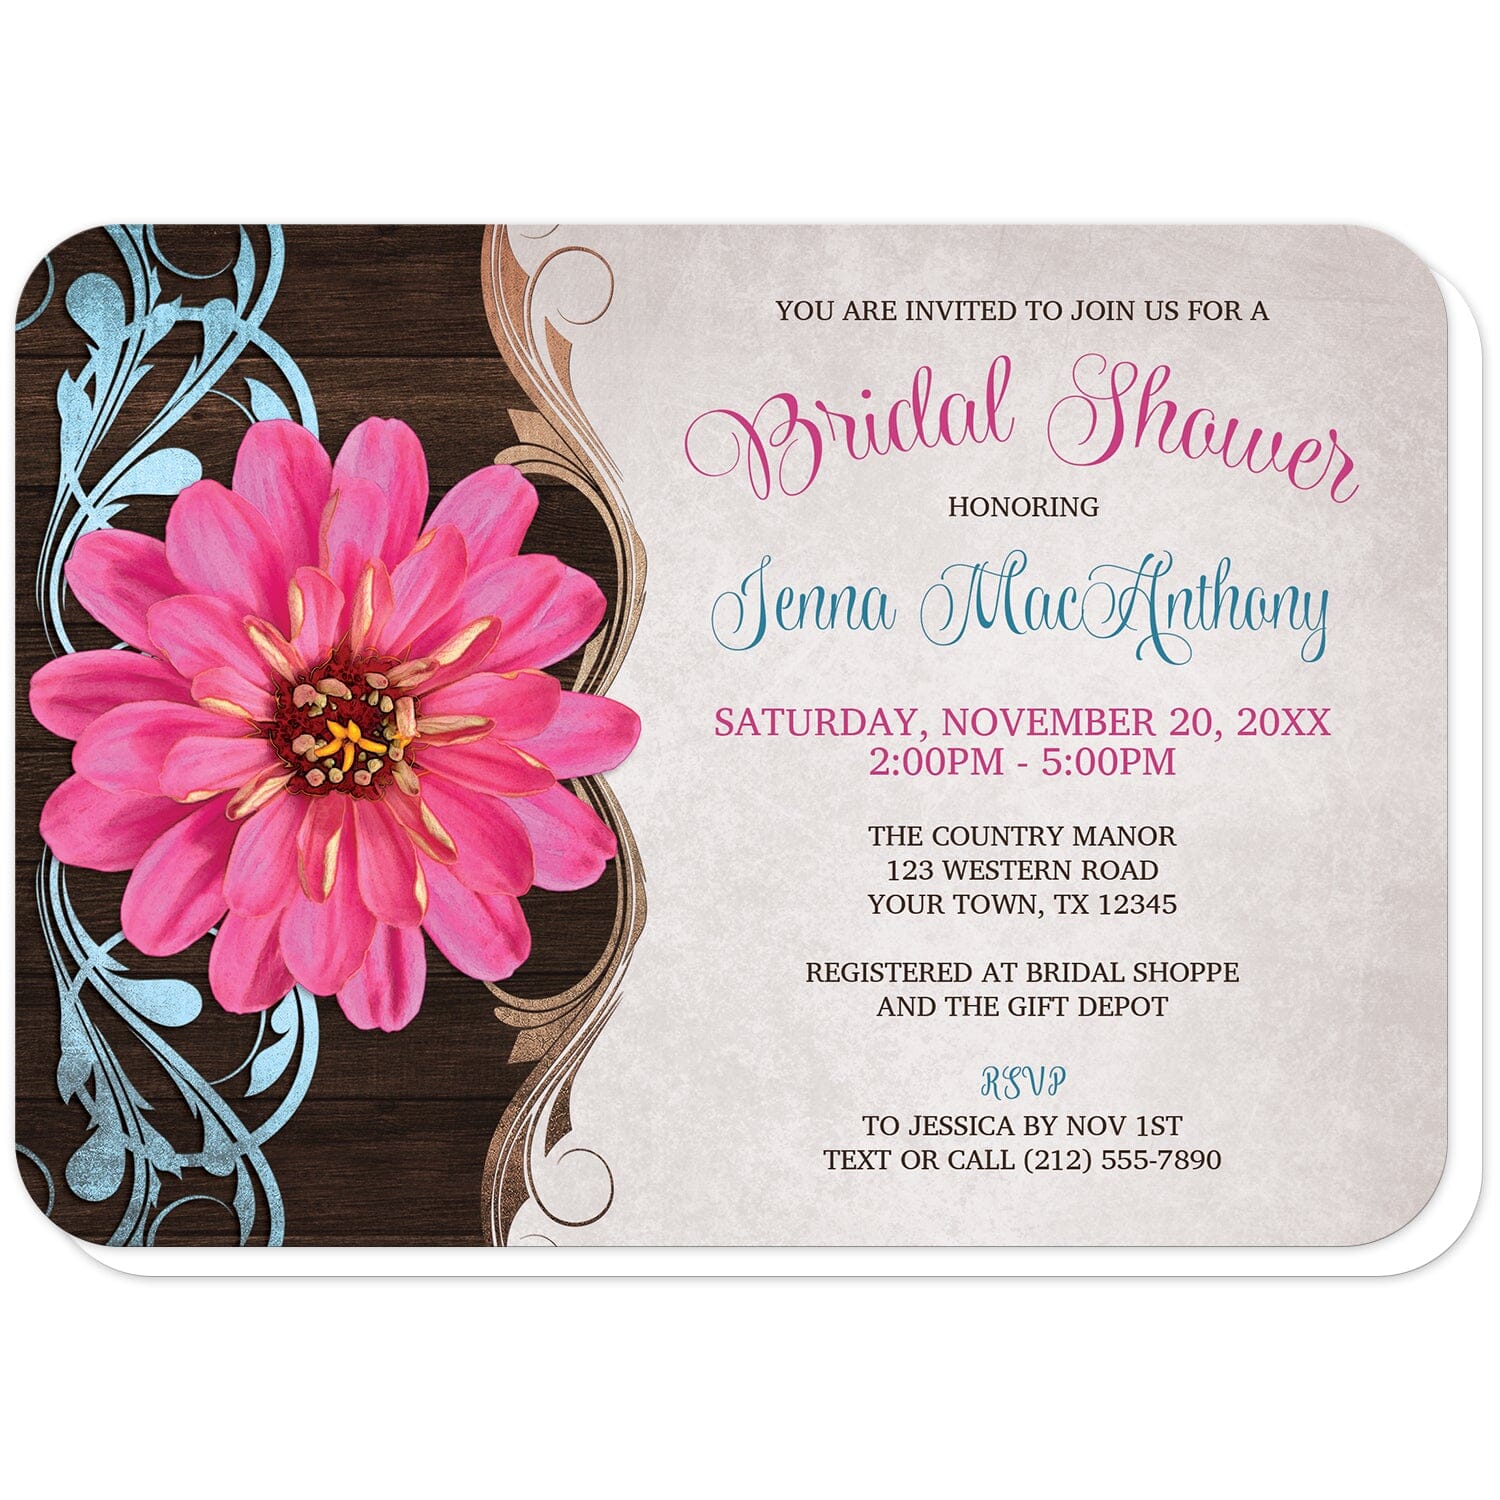 Rustic Country Pink Zinnia Bridal Shower Invitations (with rounded corners) at Artistically Invited. Southern-inspired rustic country pink zinnia bridal shower invitations with a pretty and vibrant pink zinnia flower over a brown wood pattern with blue and tan flourishes along the left side. Your personalized bridal shower celebration details are custom printed in brown, blue, and pink over a light parchment-colored background.